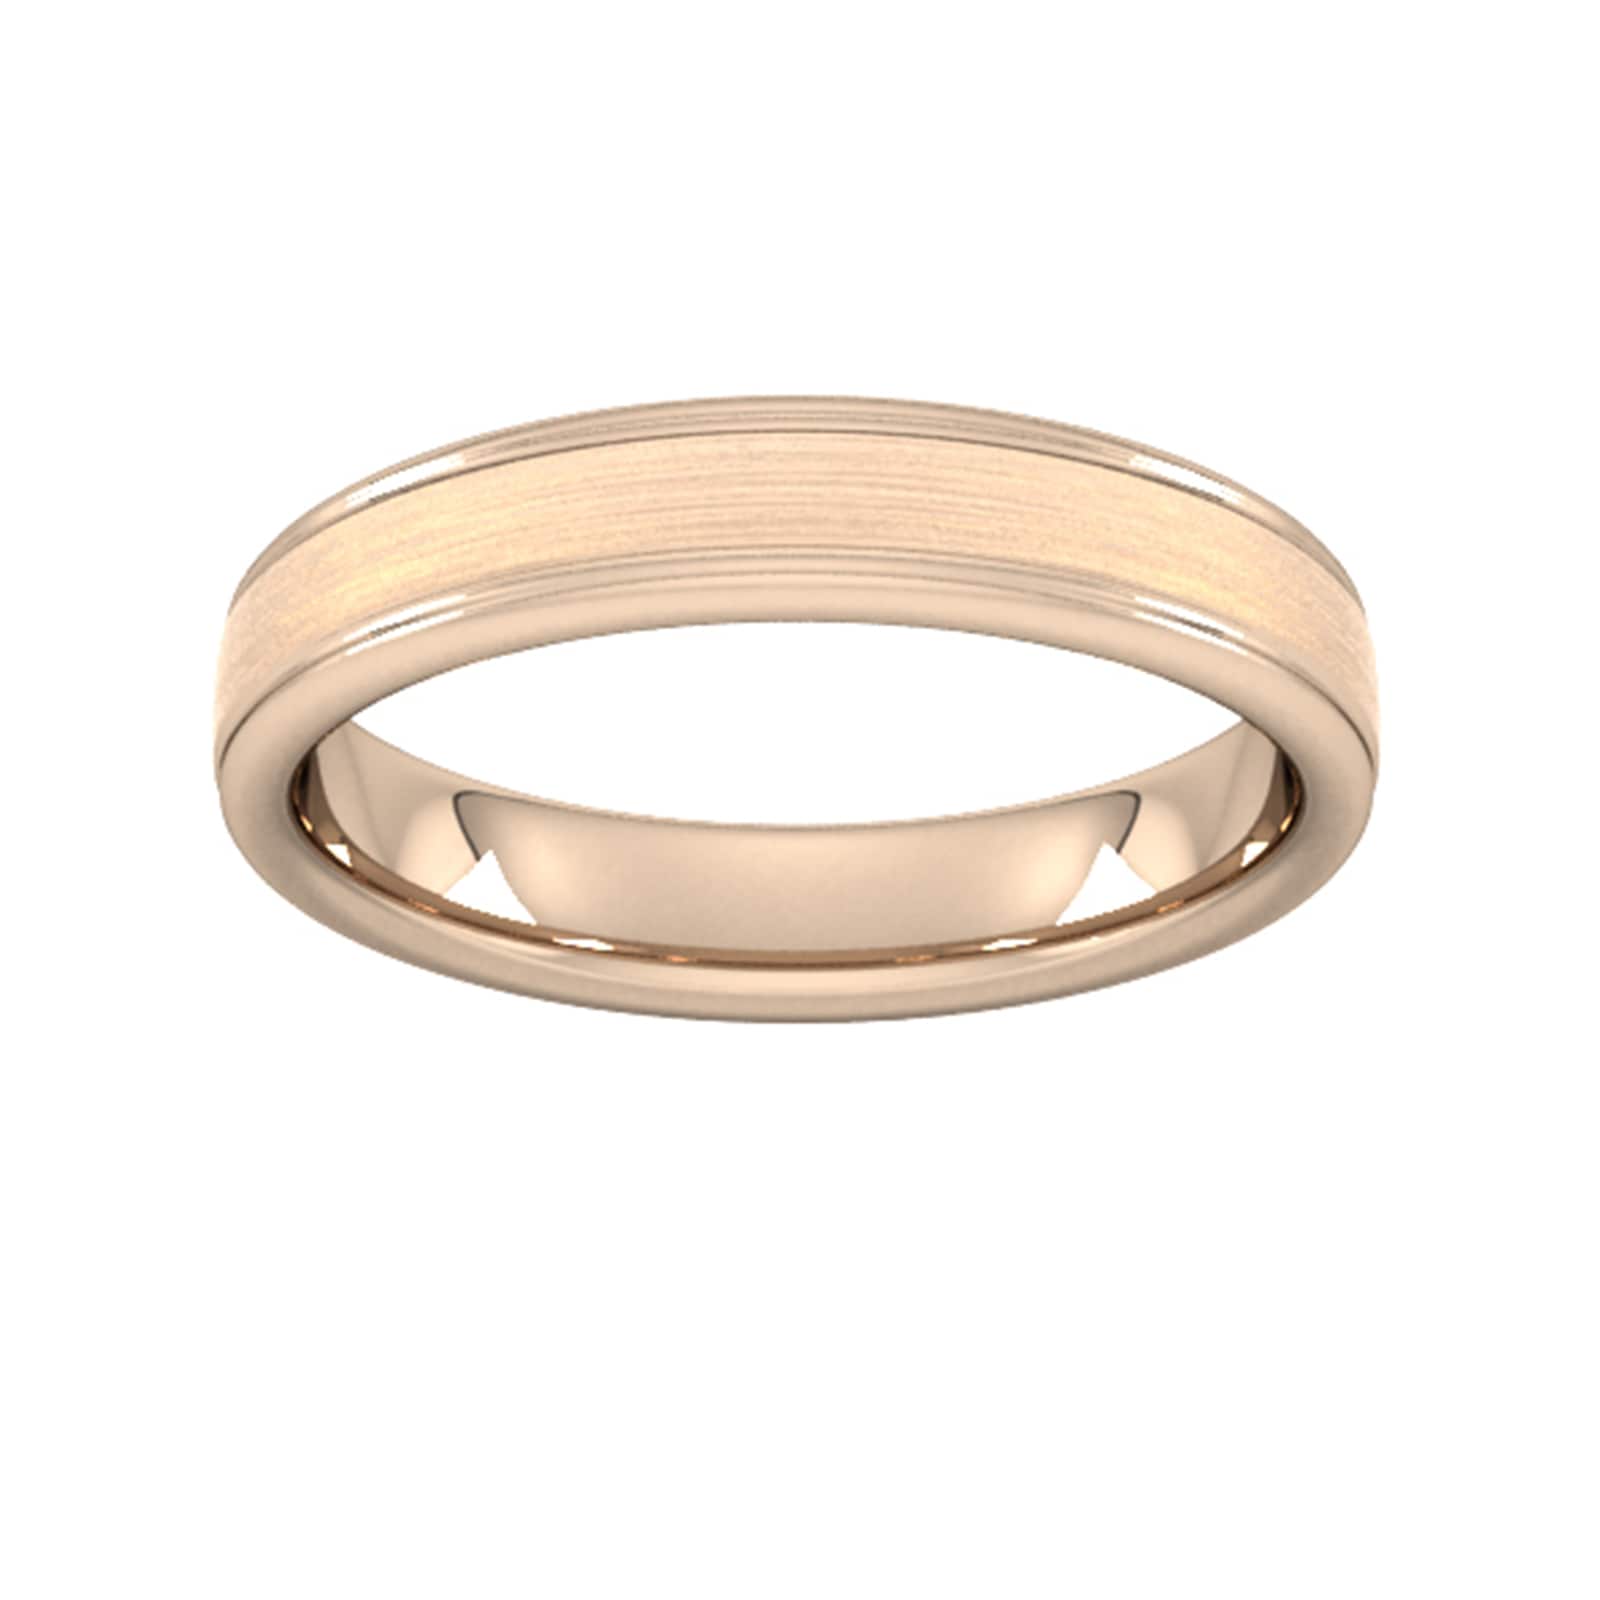 4mm Traditional Court Standard Matt Centre With Grooves Wedding Ring In 18 Carat Rose Gold - Ring Size M